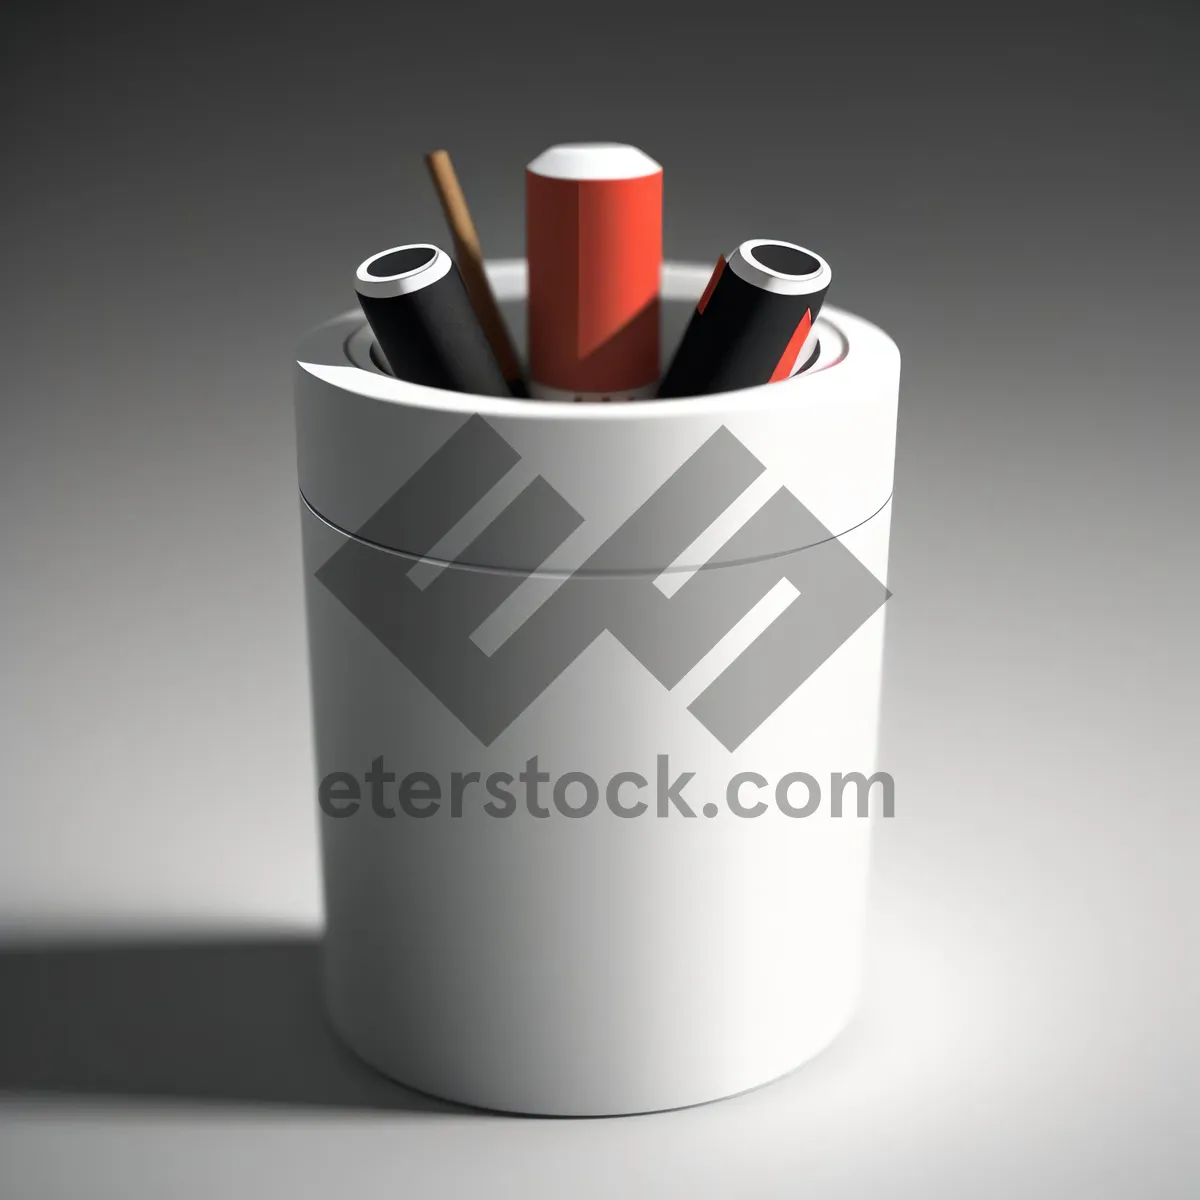 Picture of Lightweight 3D Special Design in Paper Container.